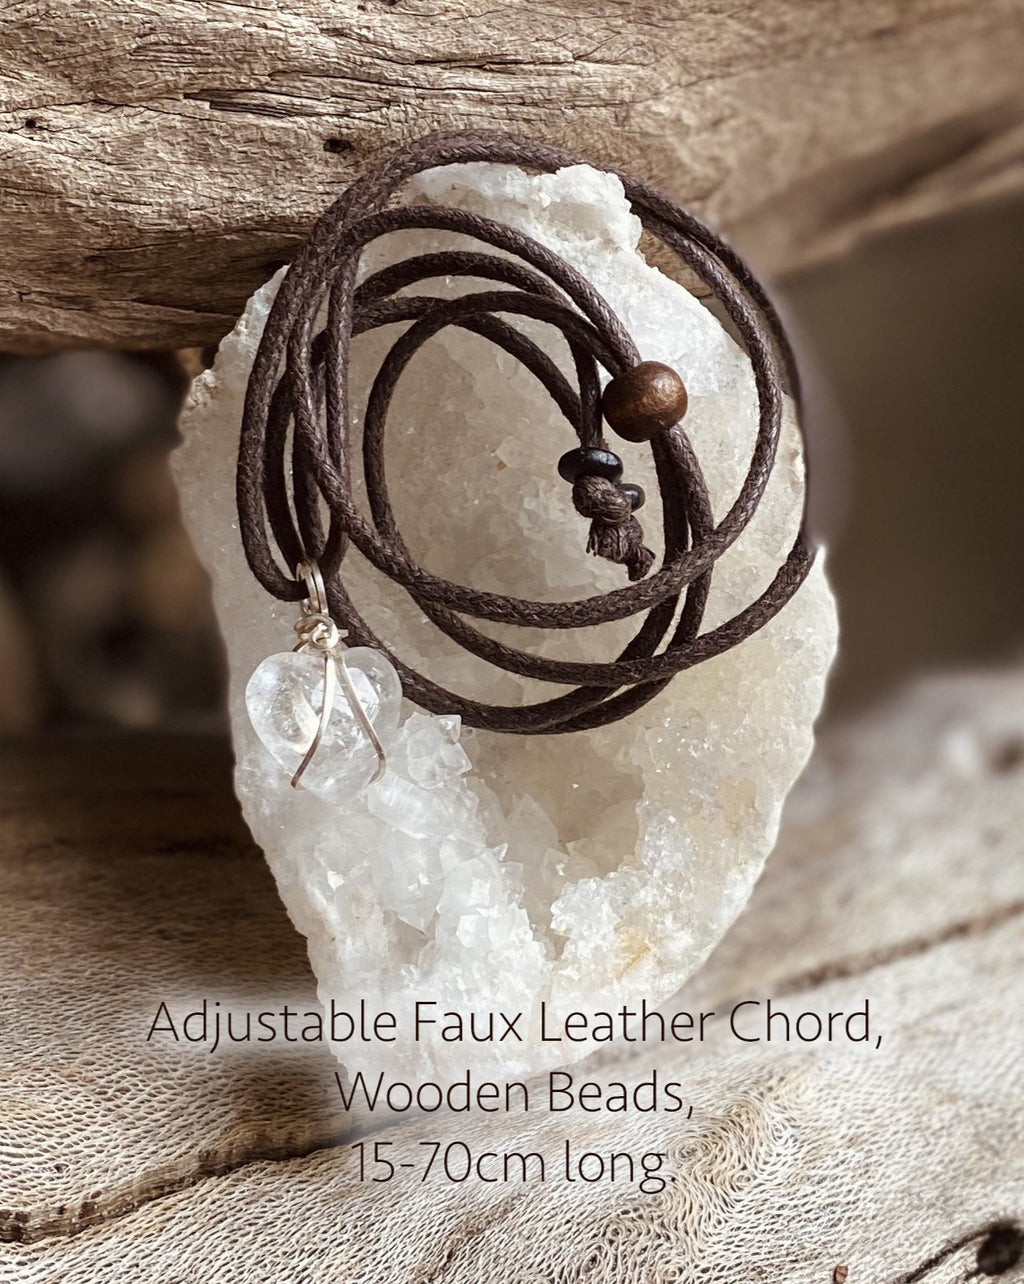 An adjustable length faux leather chord with wooden beads for wearing a crystal pendant. Brown in colour.